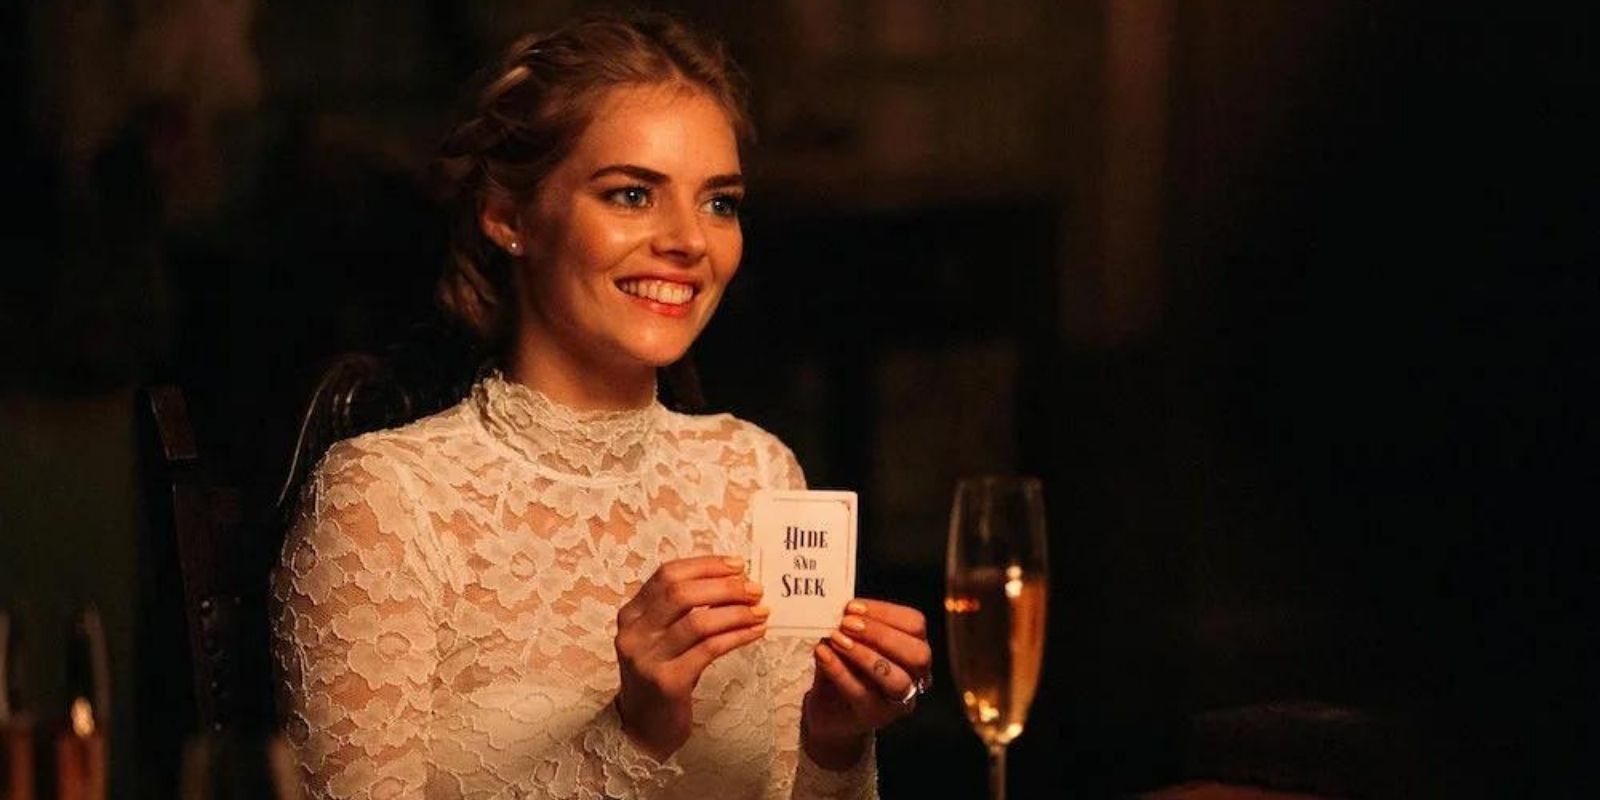 Grace sitting at table holding card